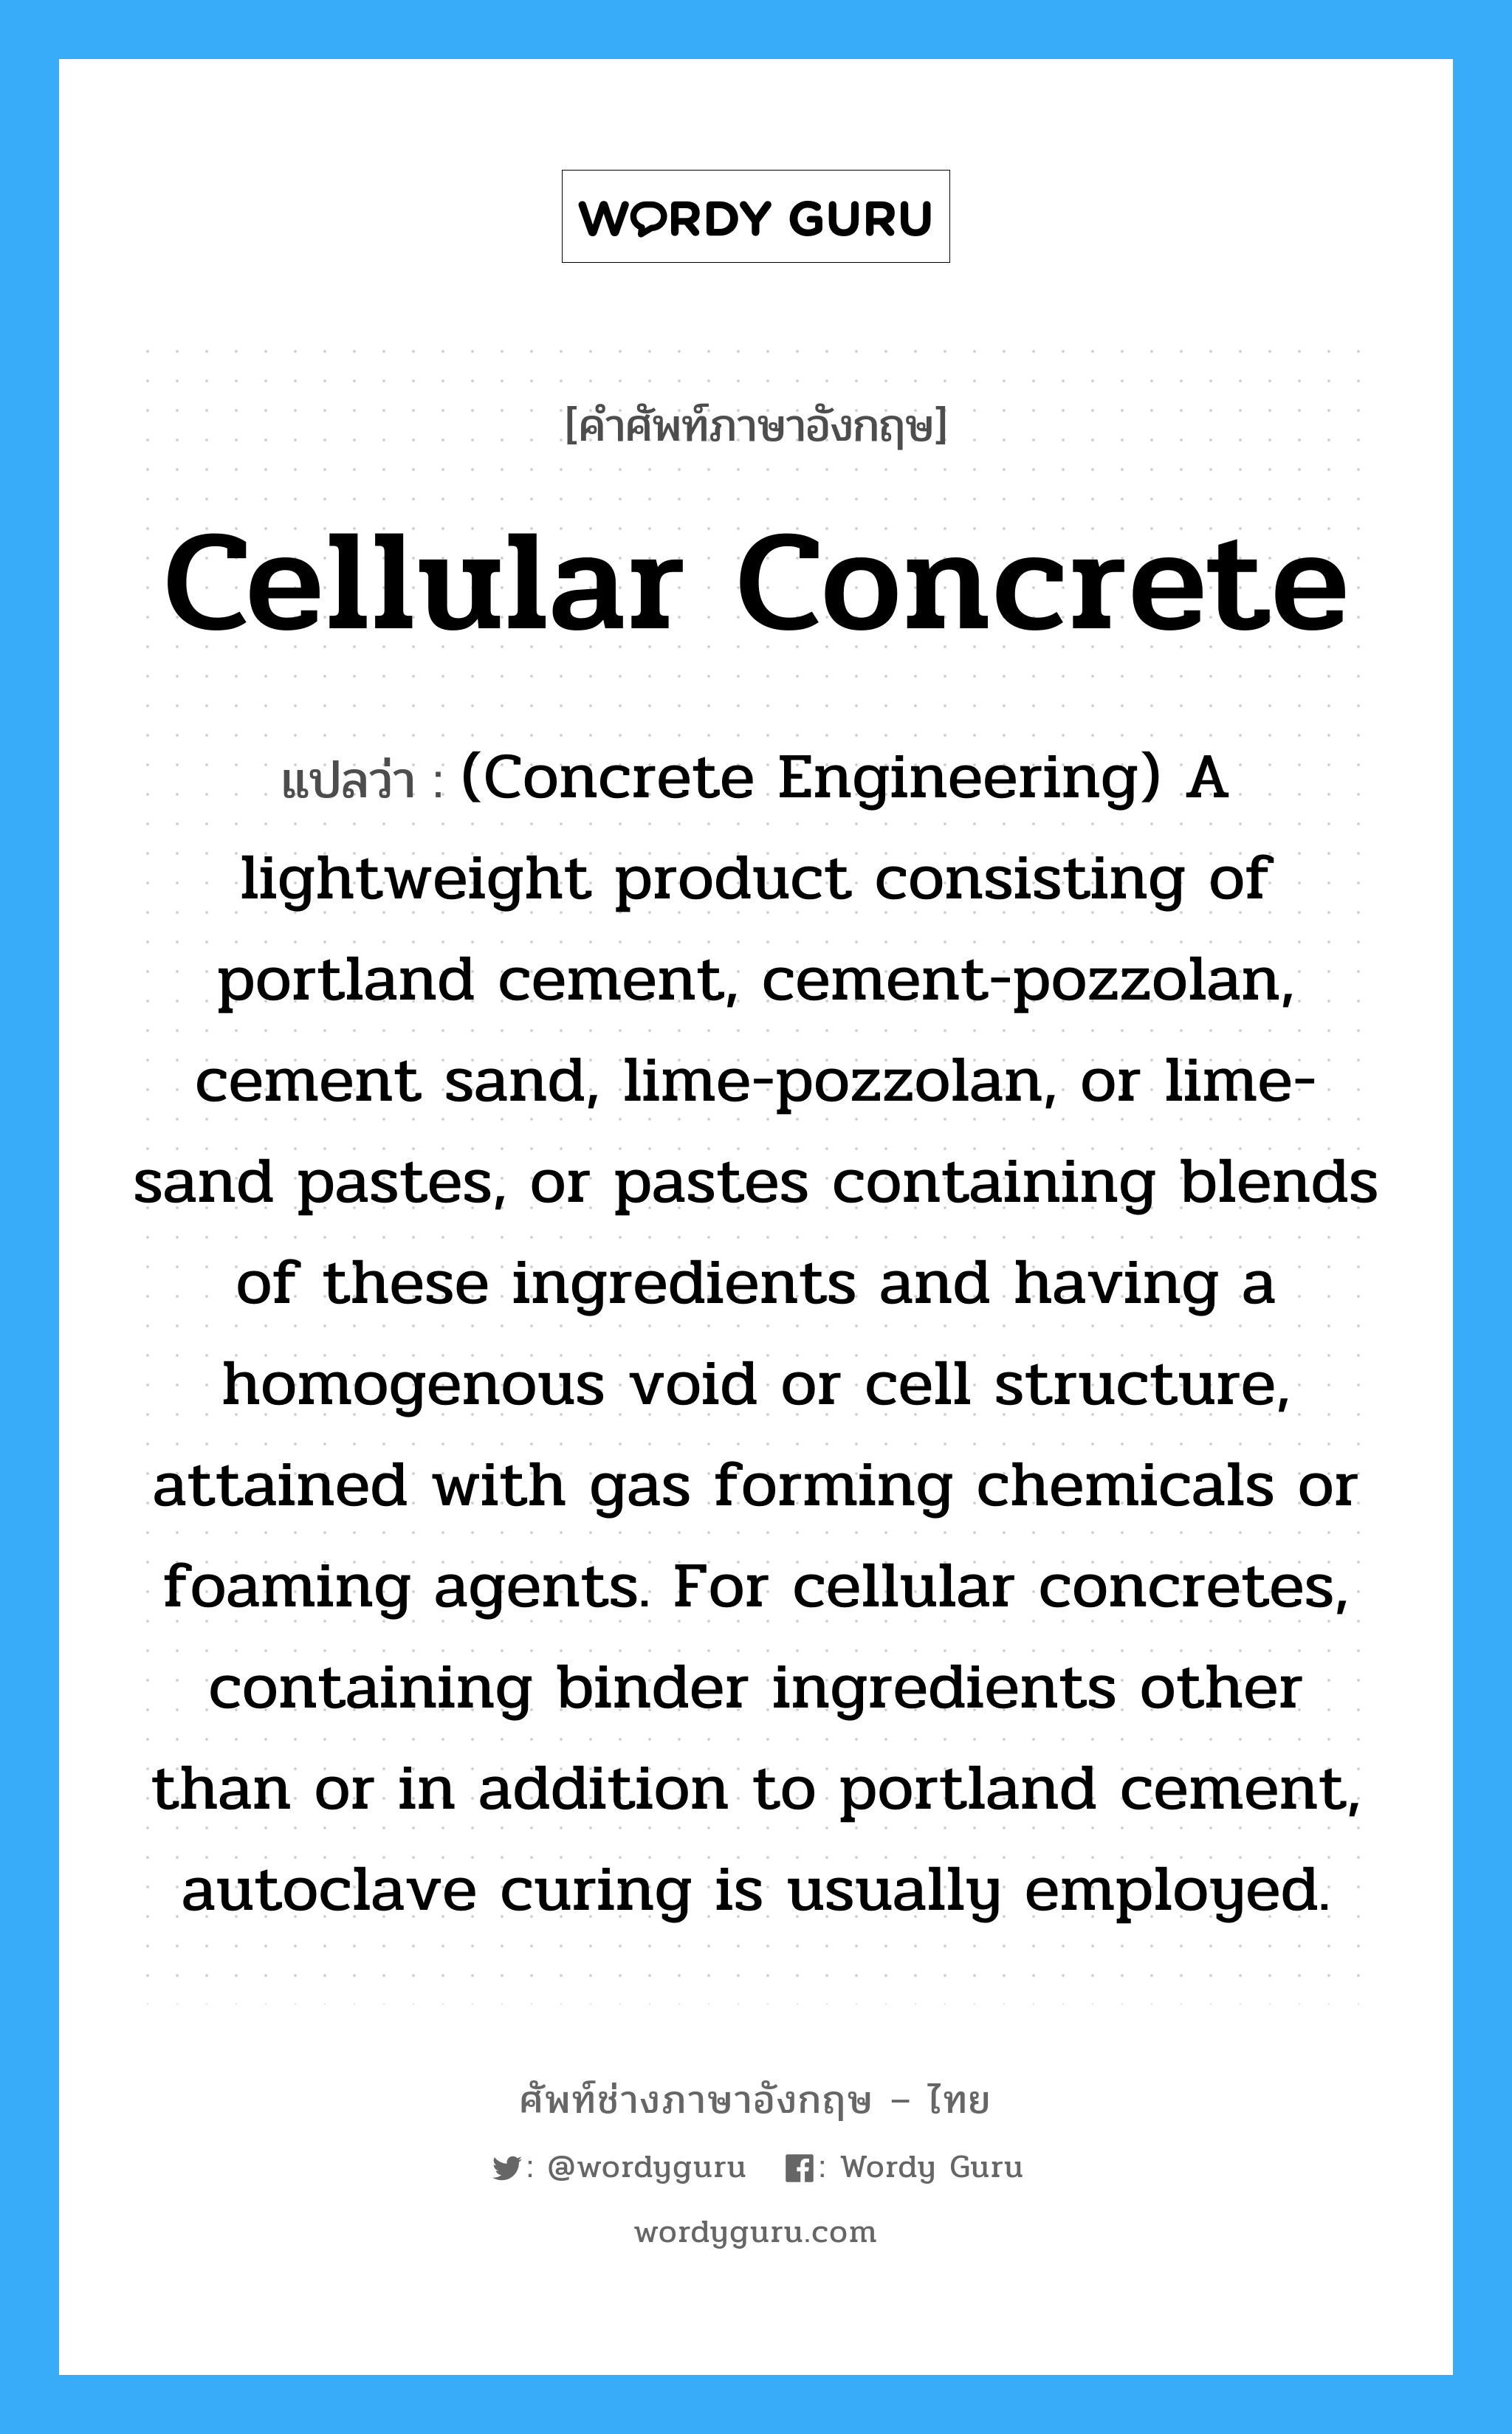 Cellular Concrete แปลว่า?, คำศัพท์ช่างภาษาอังกฤษ - ไทย Cellular Concrete คำศัพท์ภาษาอังกฤษ Cellular Concrete แปลว่า (Concrete Engineering) A lightweight product consisting of portland cement, cement-pozzolan, cement sand, lime-pozzolan, or lime-sand pastes, or pastes containing blends of these ingredients and having a homogenous void or cell structure, attained with gas forming chemicals or foaming agents. For cellular concretes, containing binder ingredients other than or in addition to portland cement, autoclave curing is usually employed.